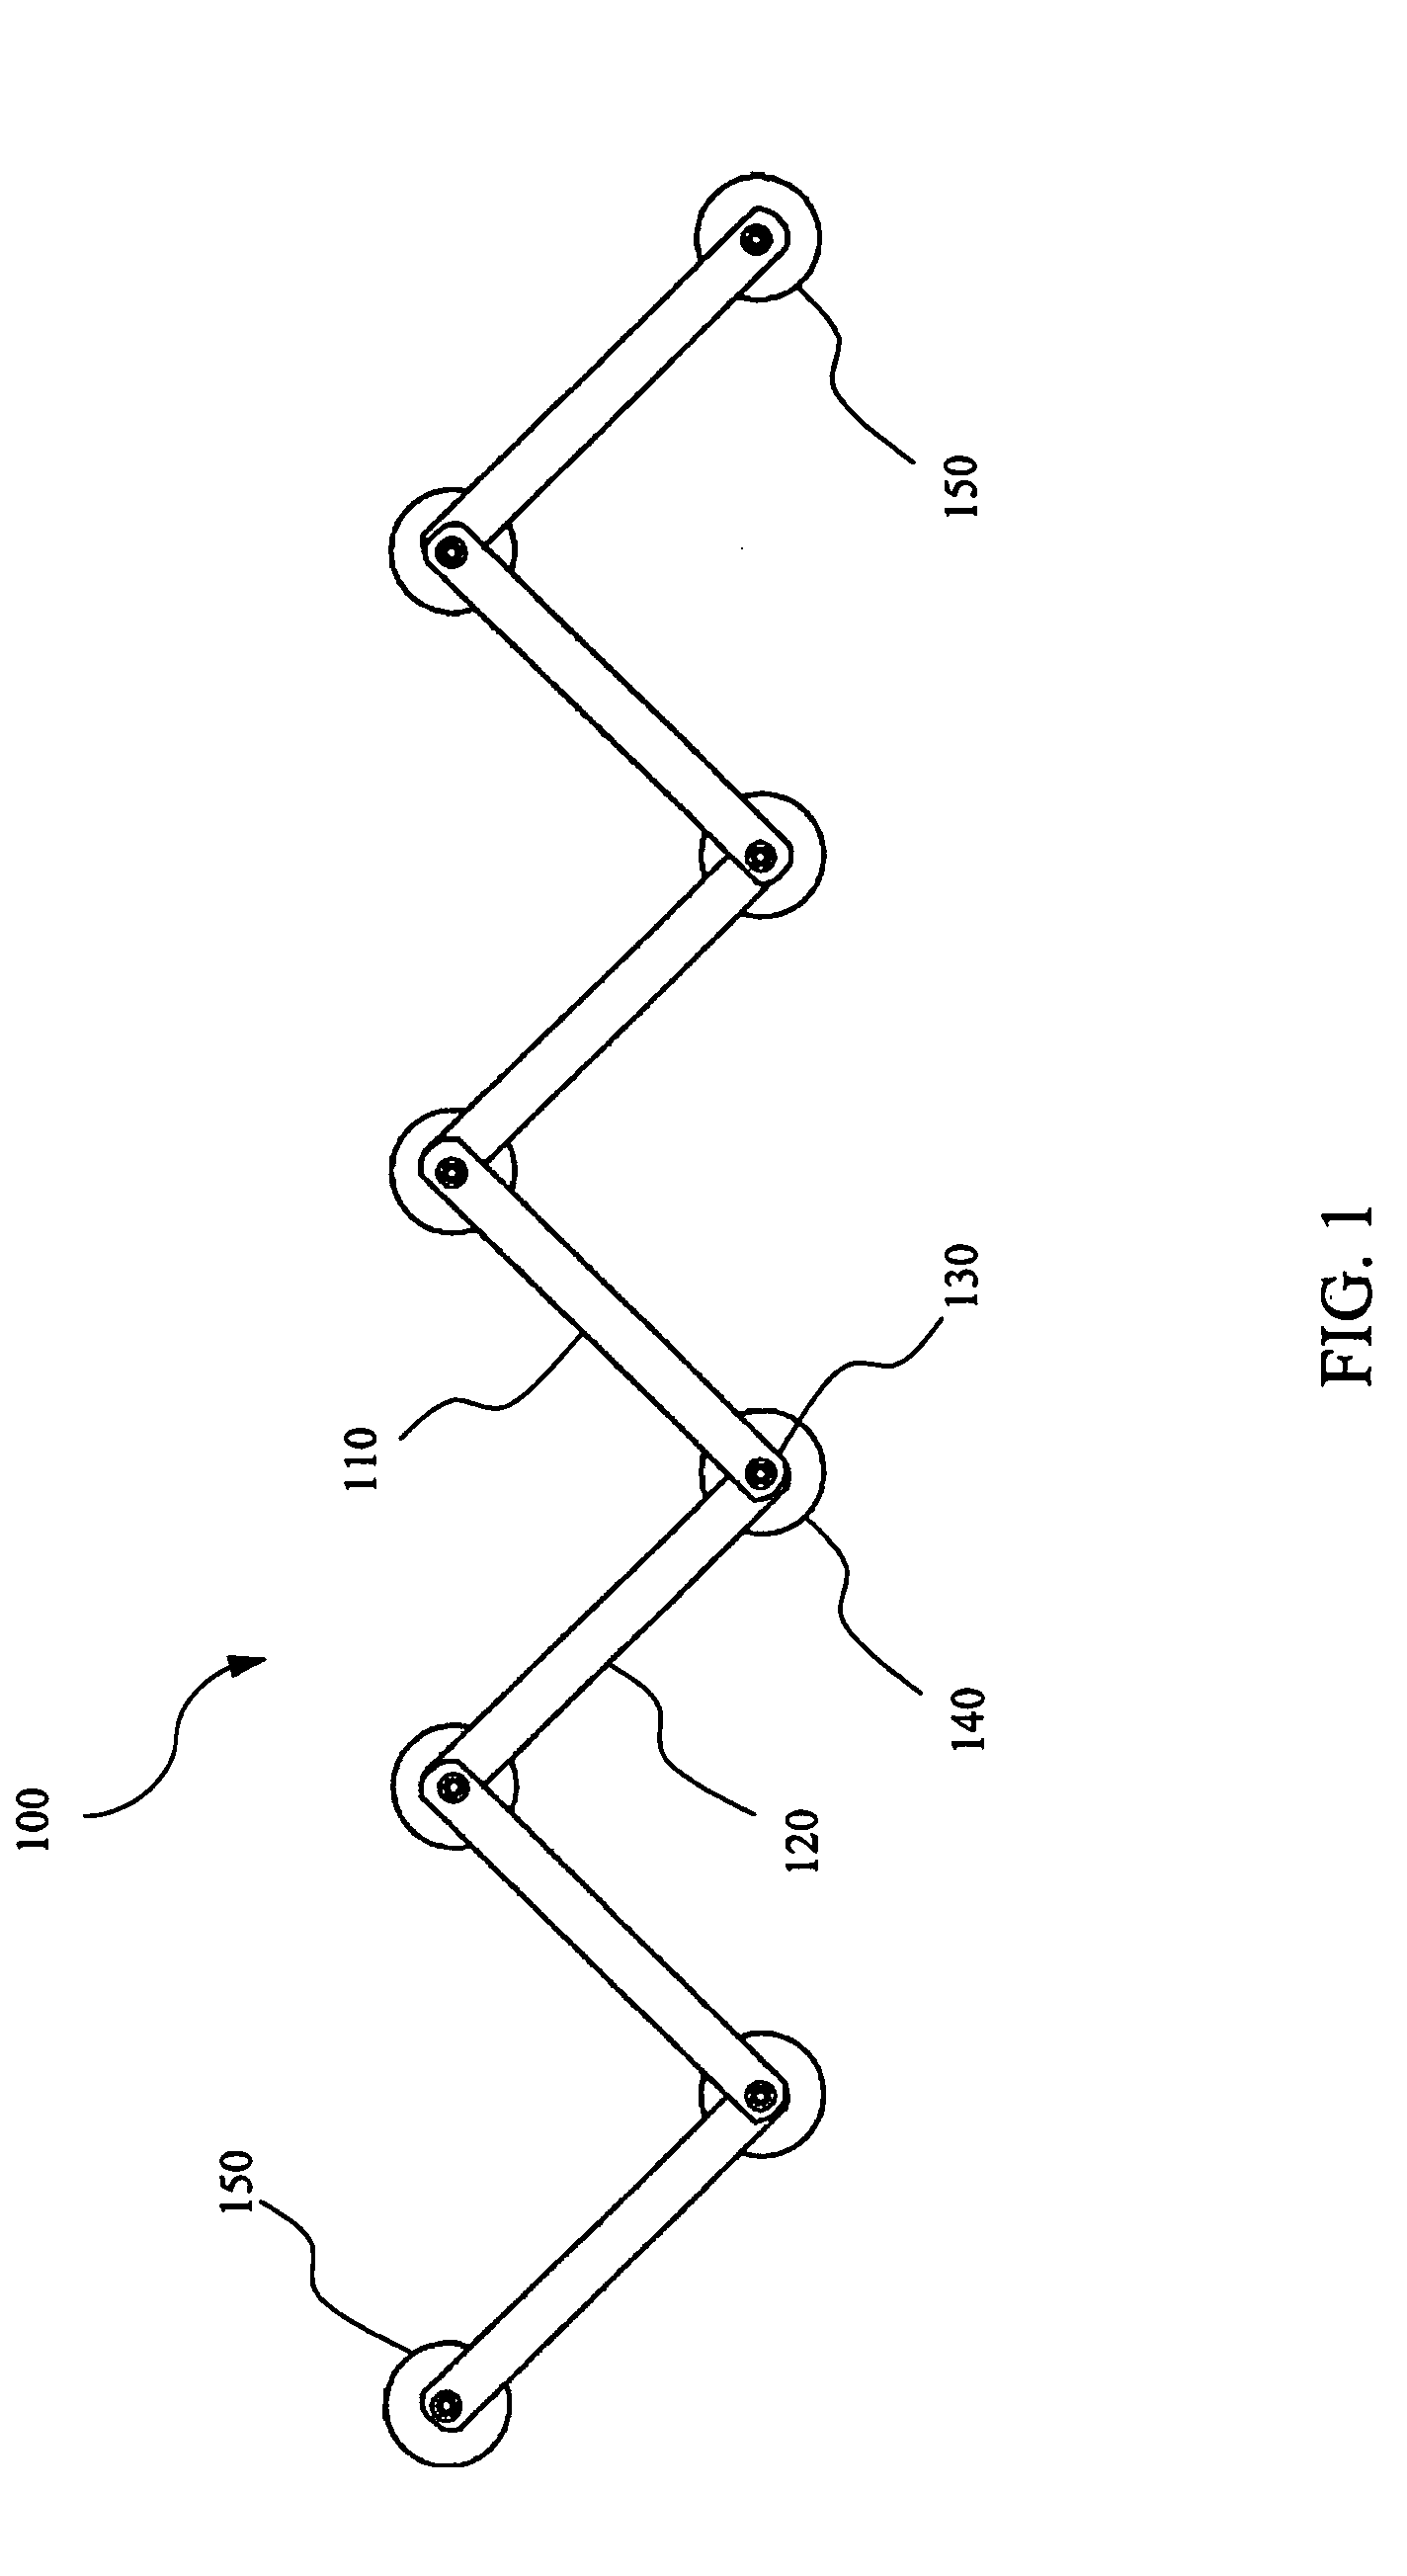 Hockey Stick-Handling Device with Sensor and Effects